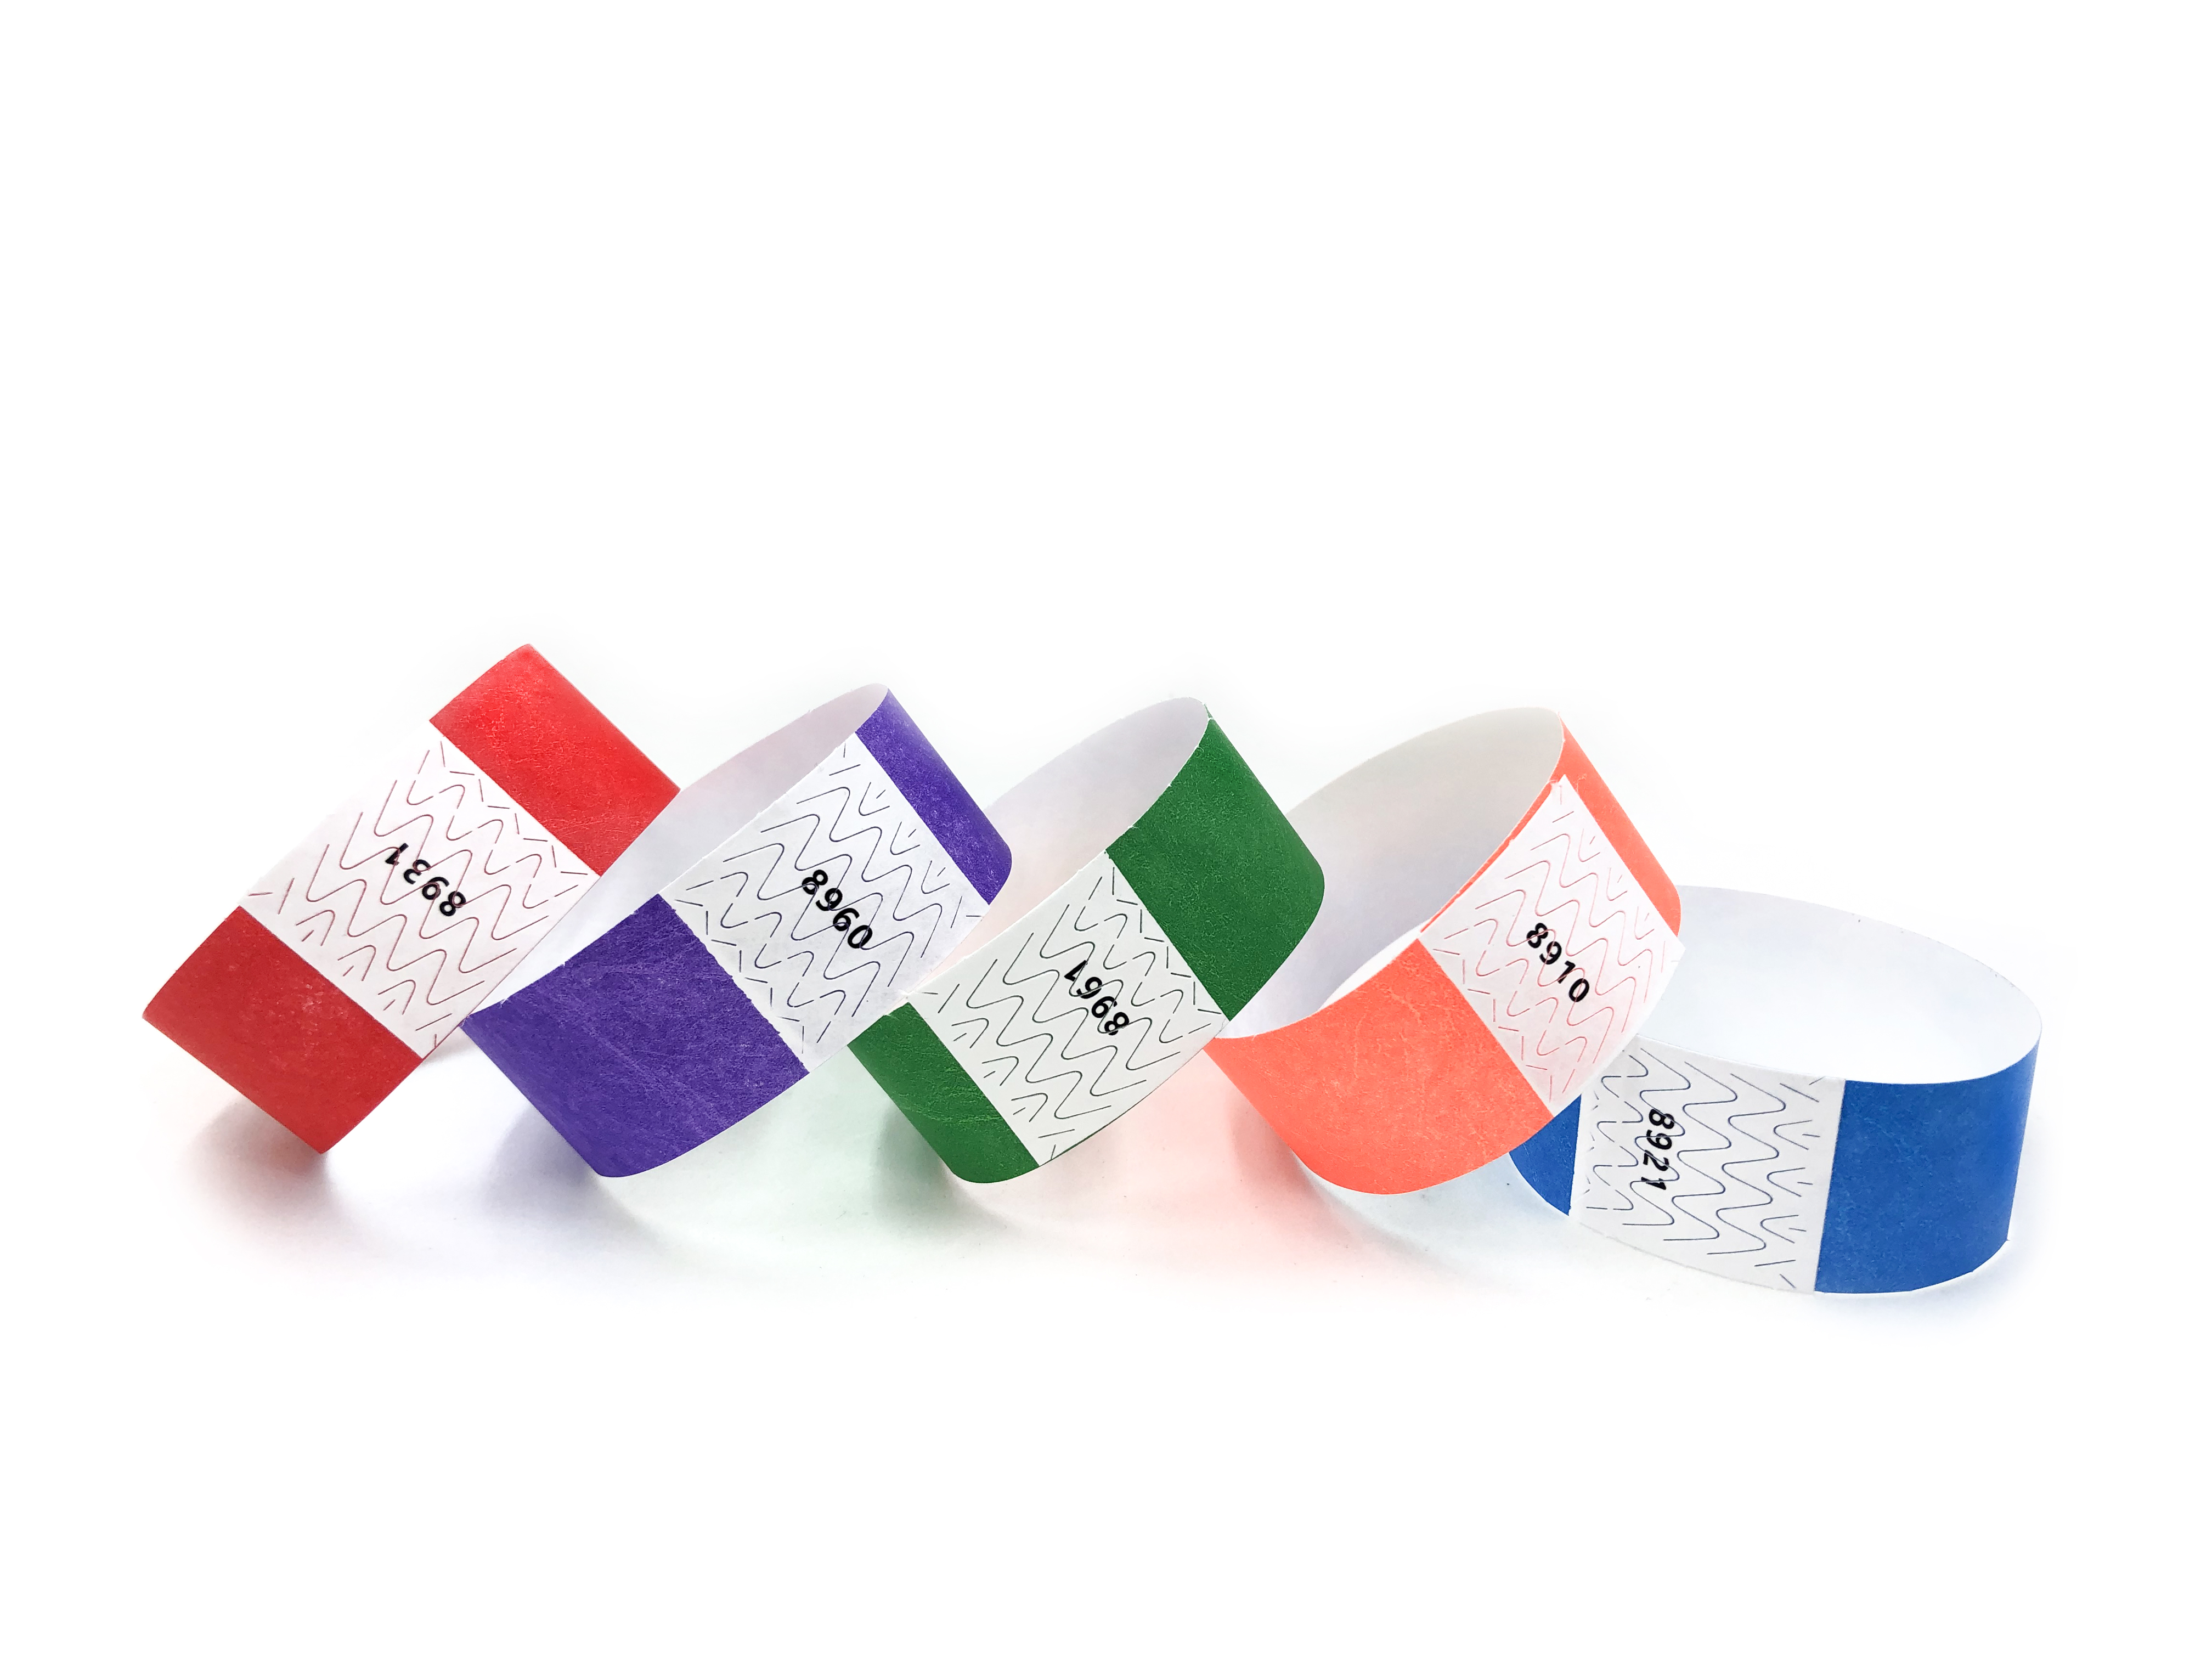 tyvek bracelets are created out of paper. Easily customizable for your event